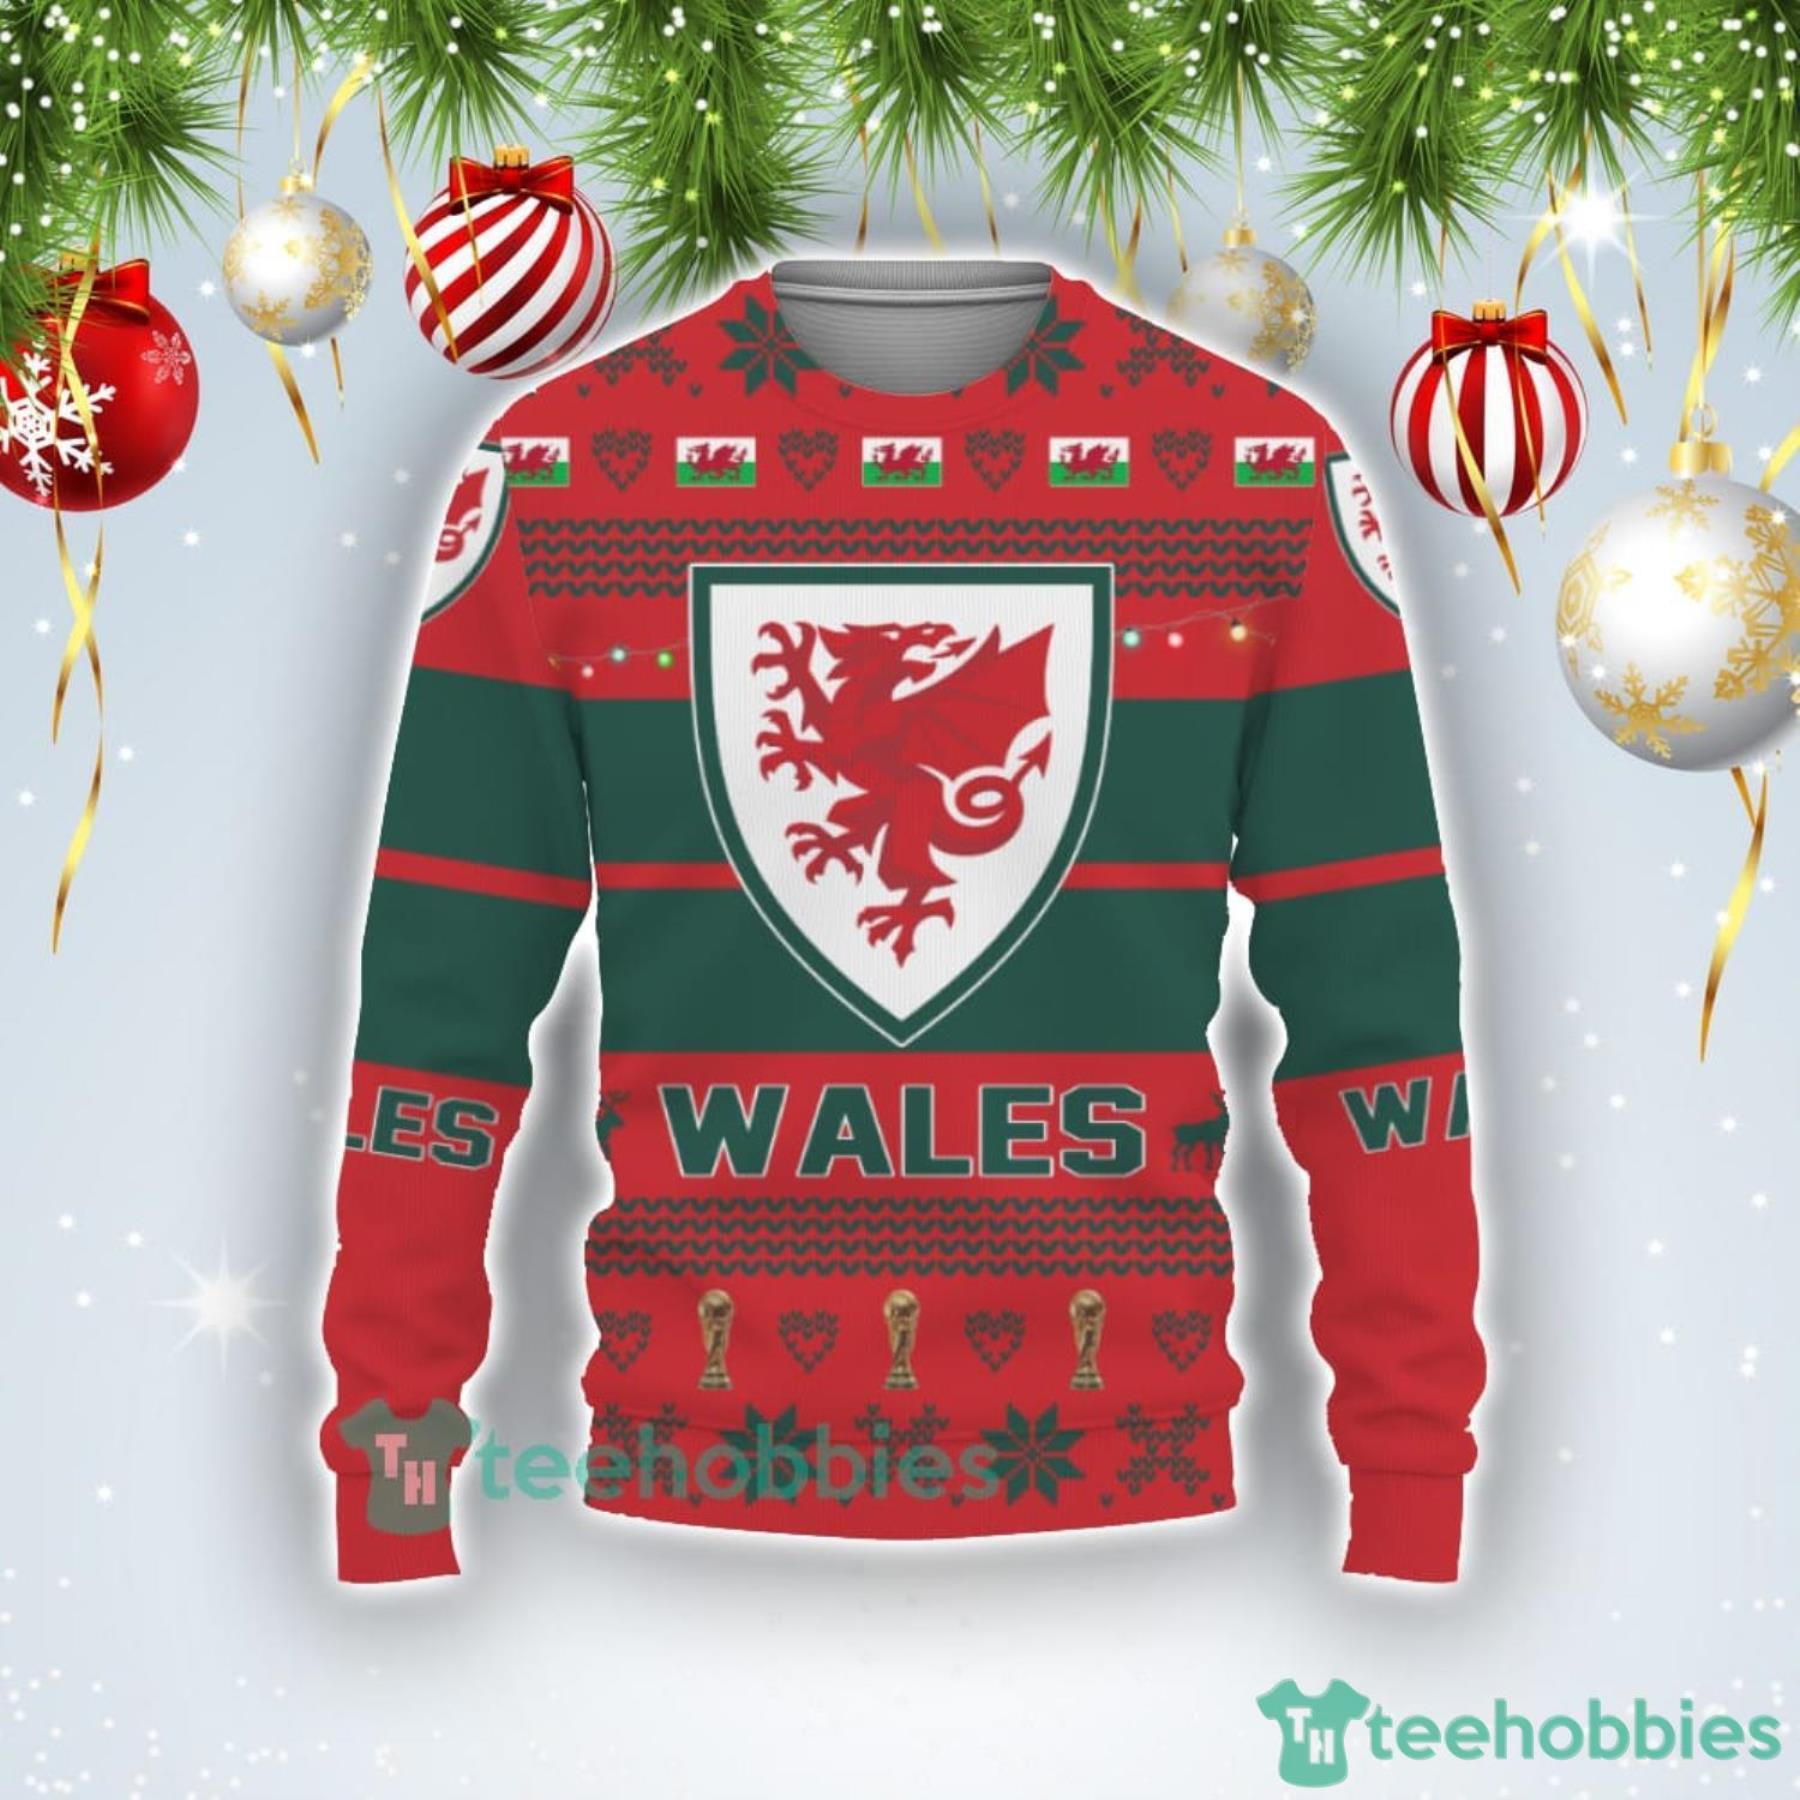 Wales National Team Qatar World Cup 2022 Merry Christmas Ugly Christmas Sweater Product Photo 1